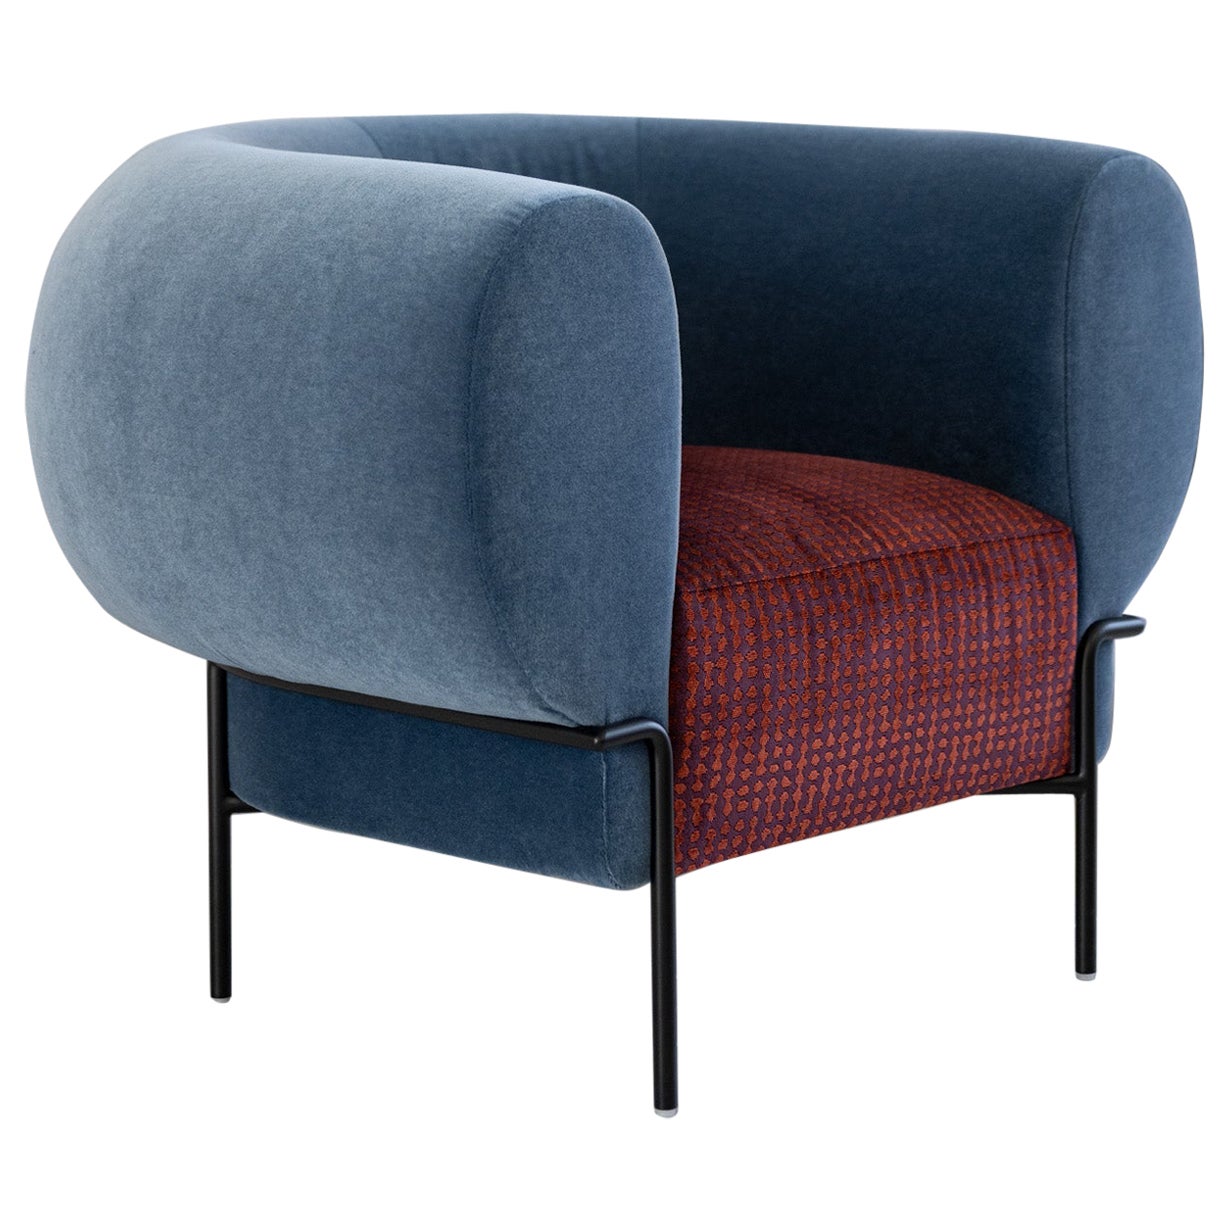 Contemporary Madda Lounge Chair in Mohair and Patterned Velvet